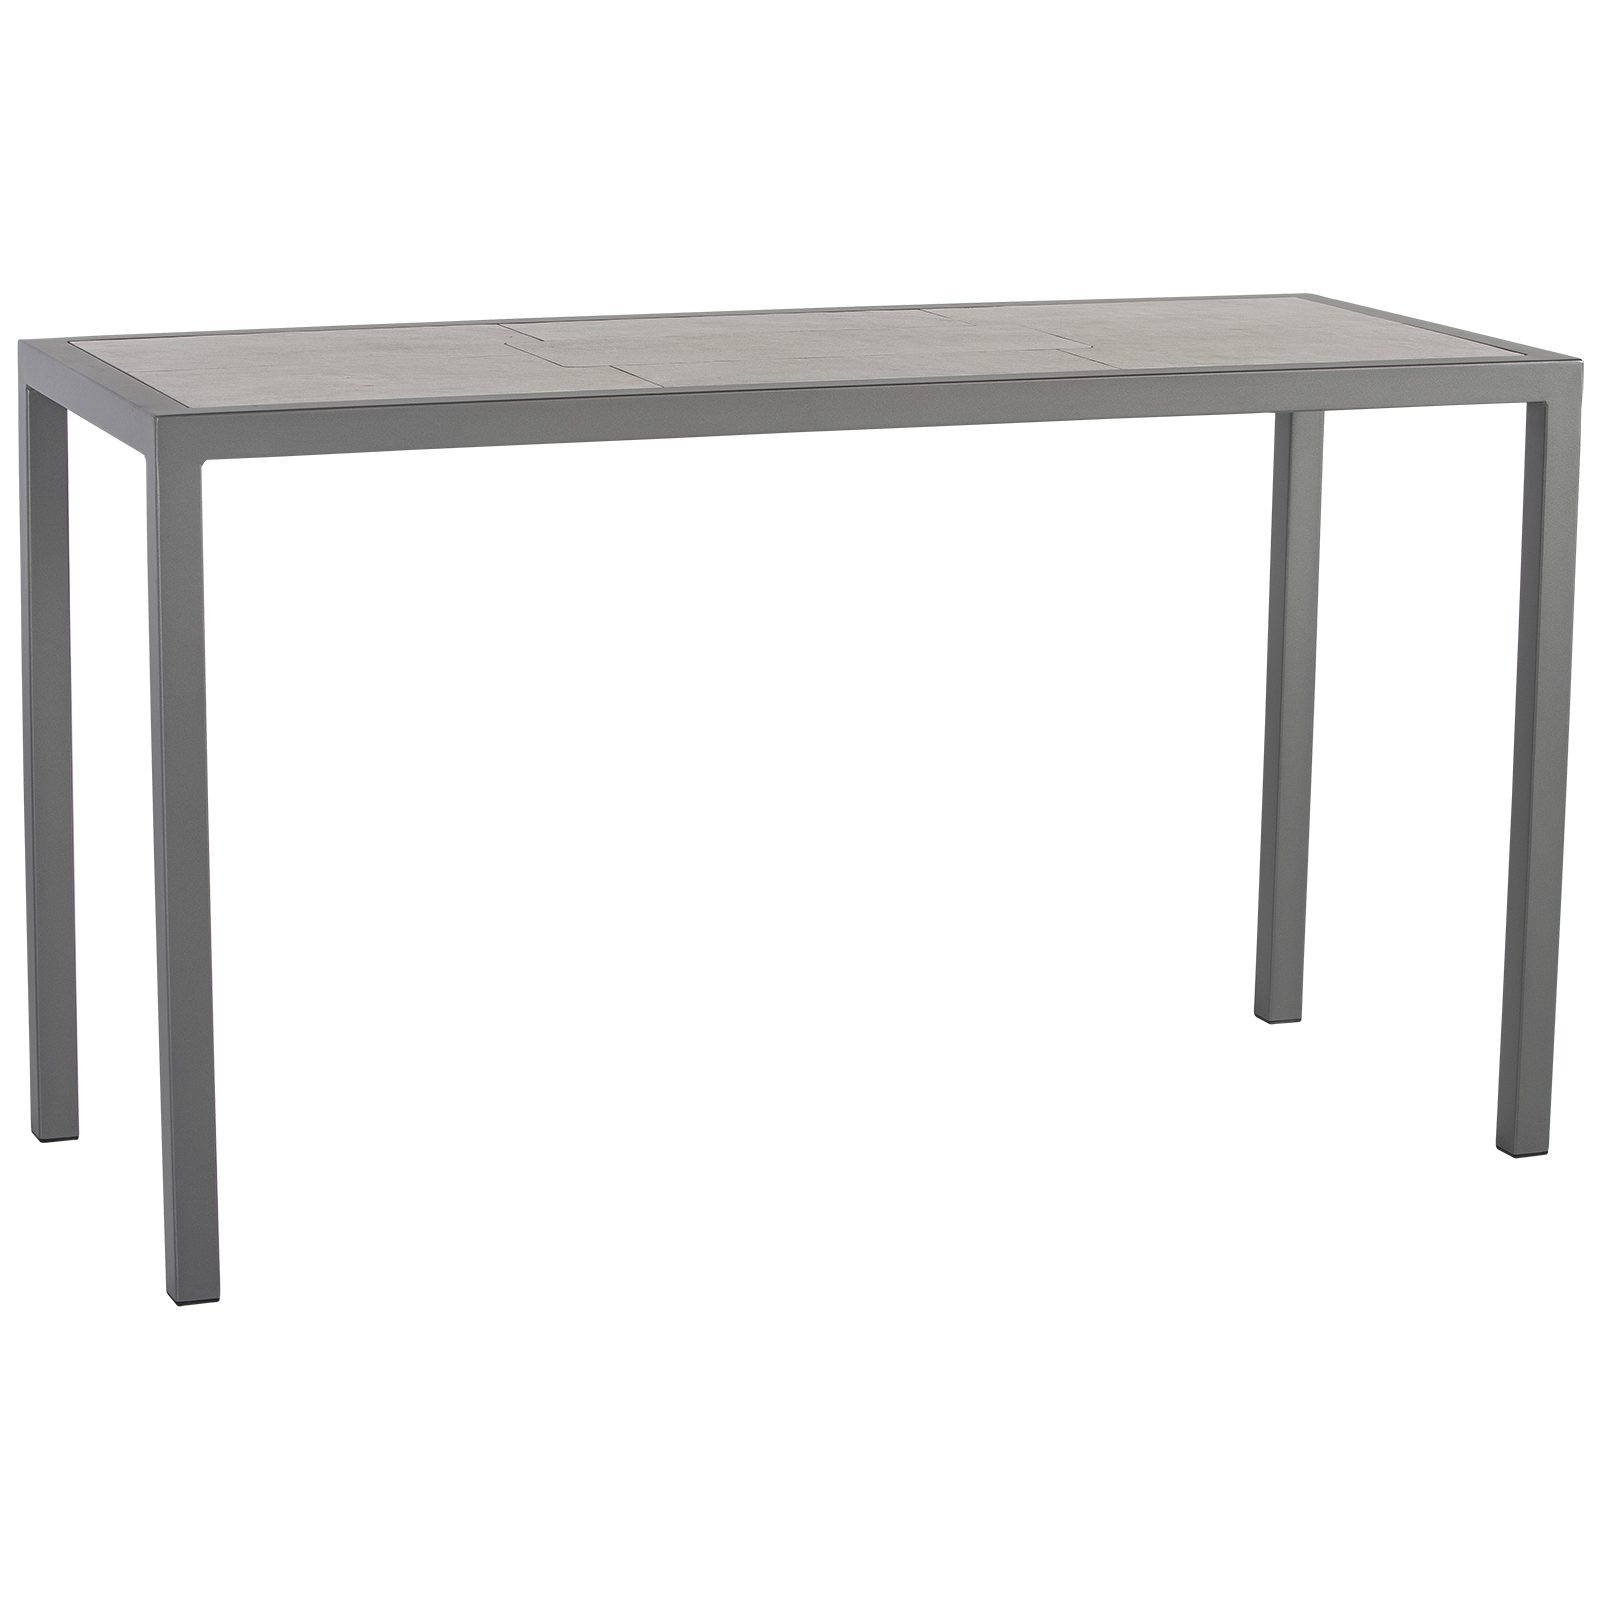 21" x 57" Dining Table - Fully Welded Tables - Quadra Iron Tables 7